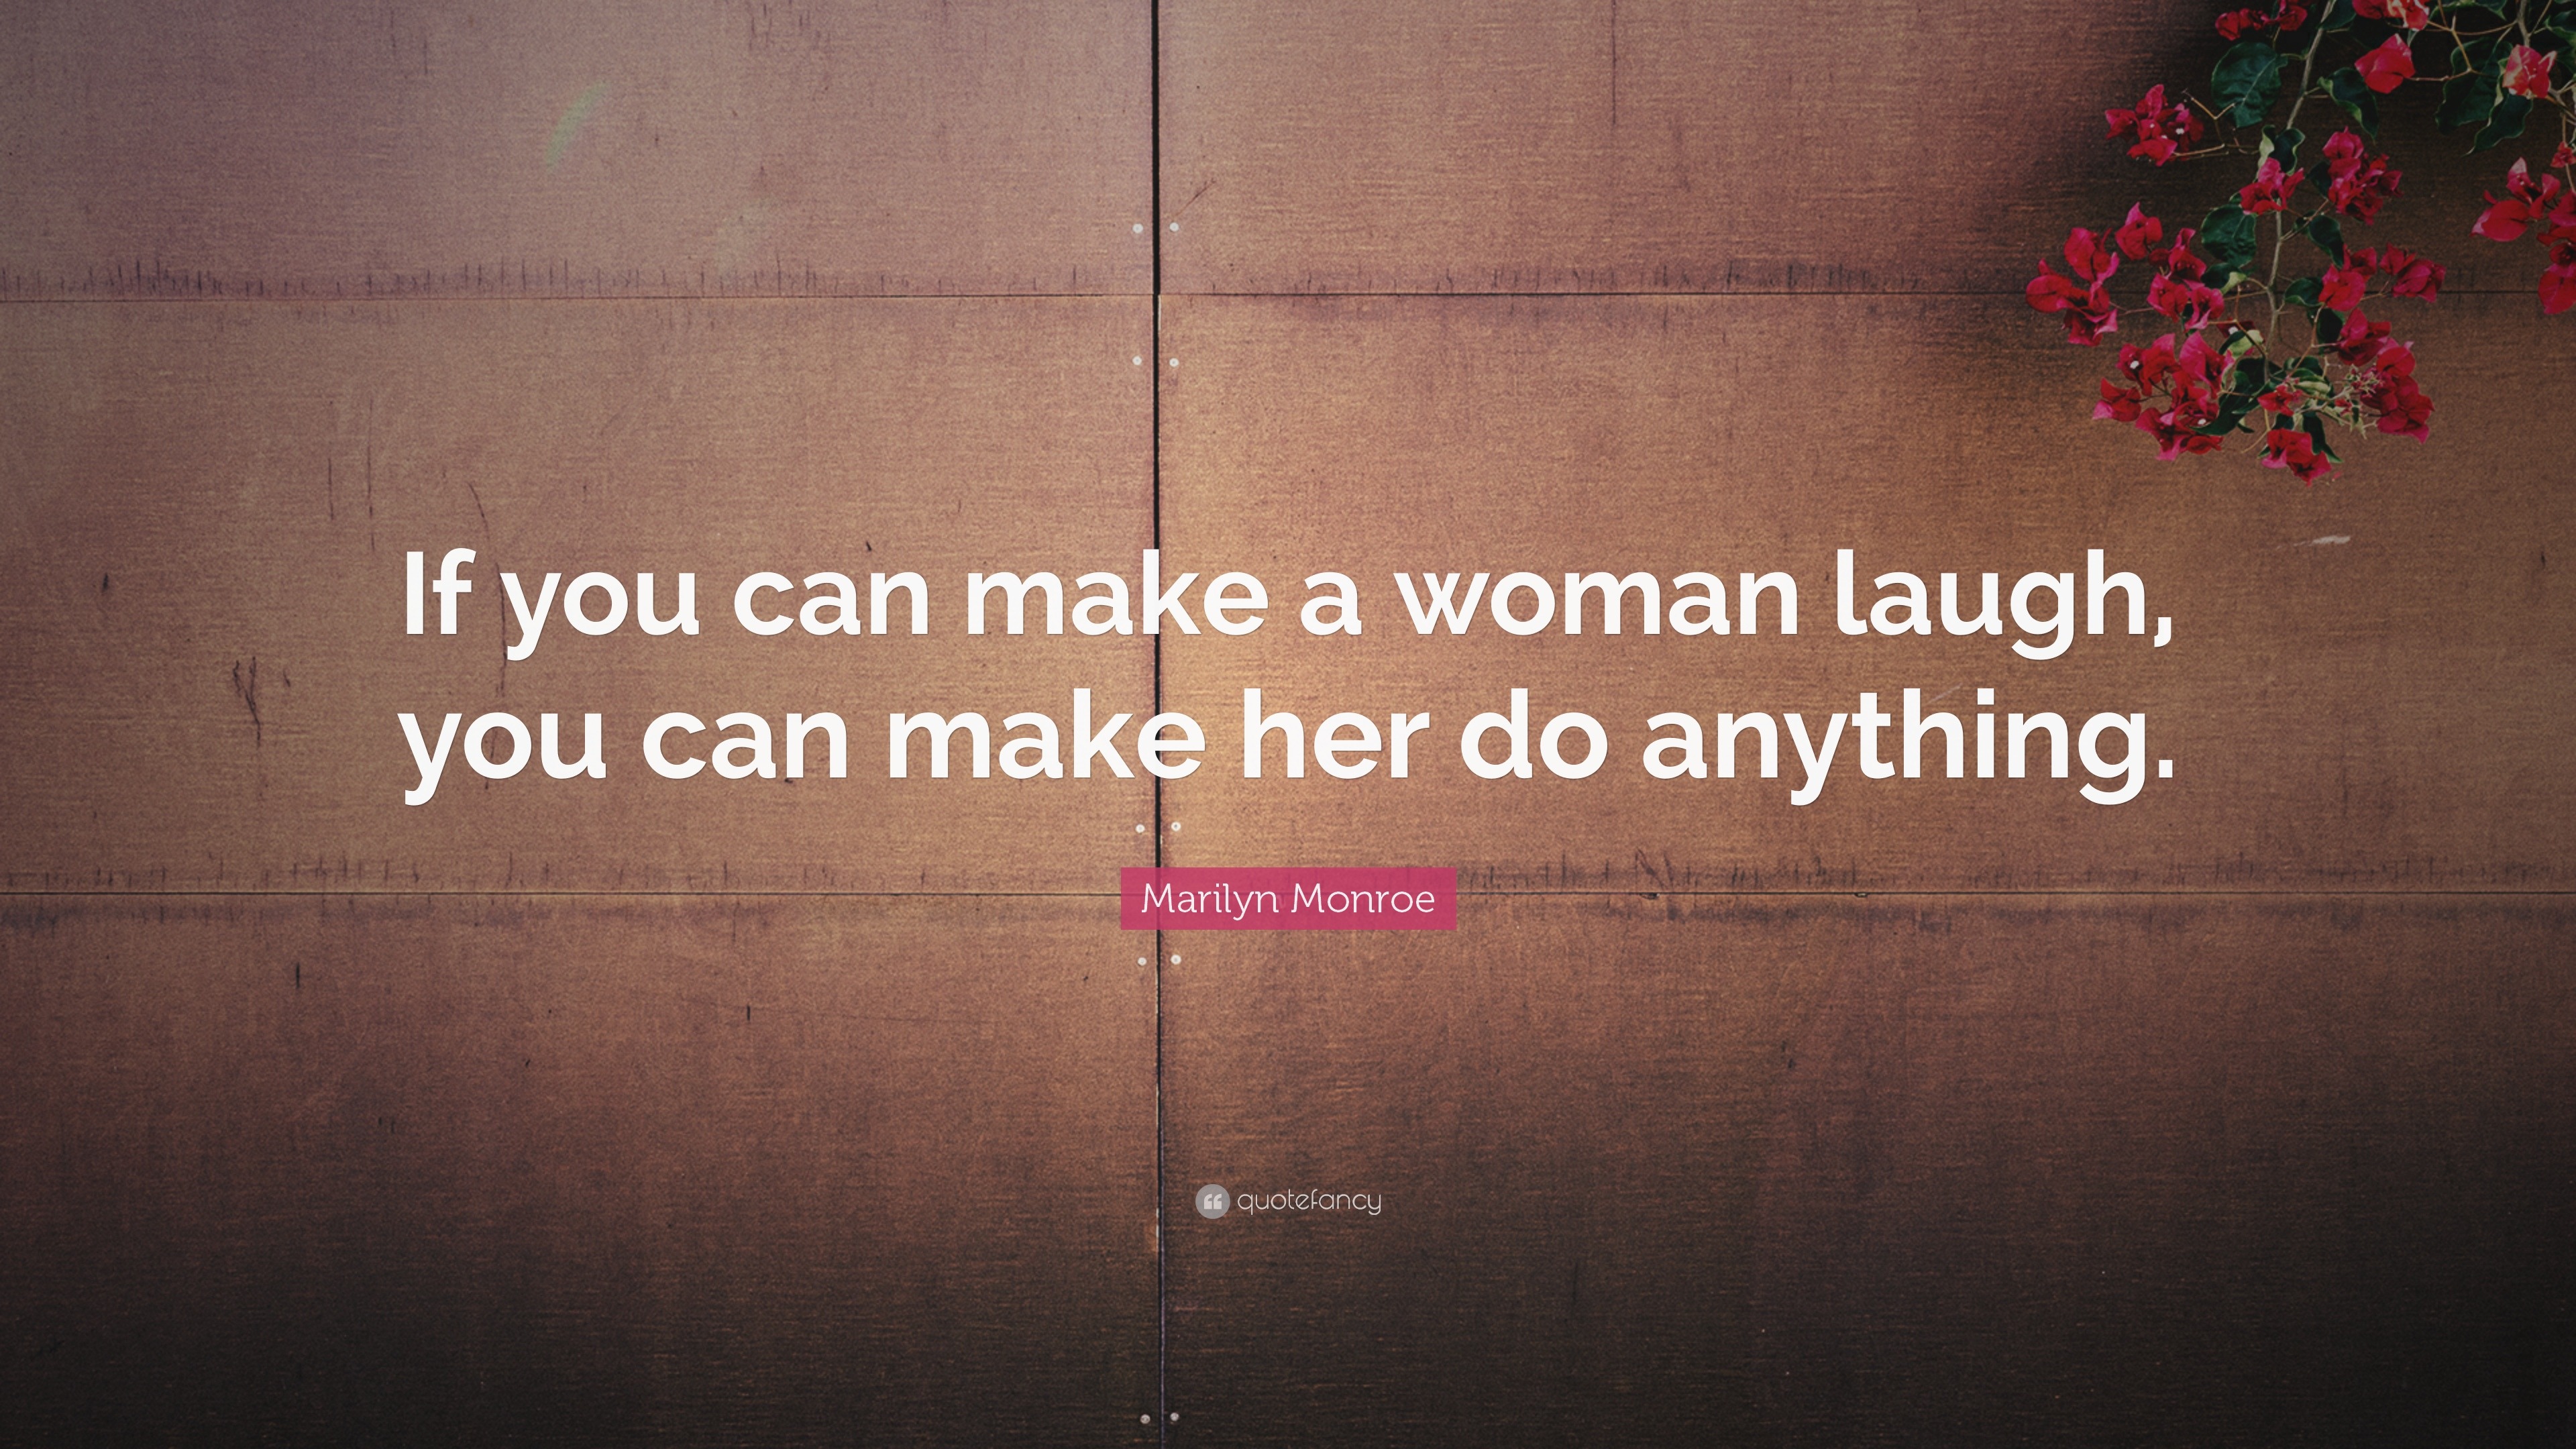 Marilyn Monroe Quote “if You Can Make A Woman Laugh You Can Make Her Do Anything ” 16